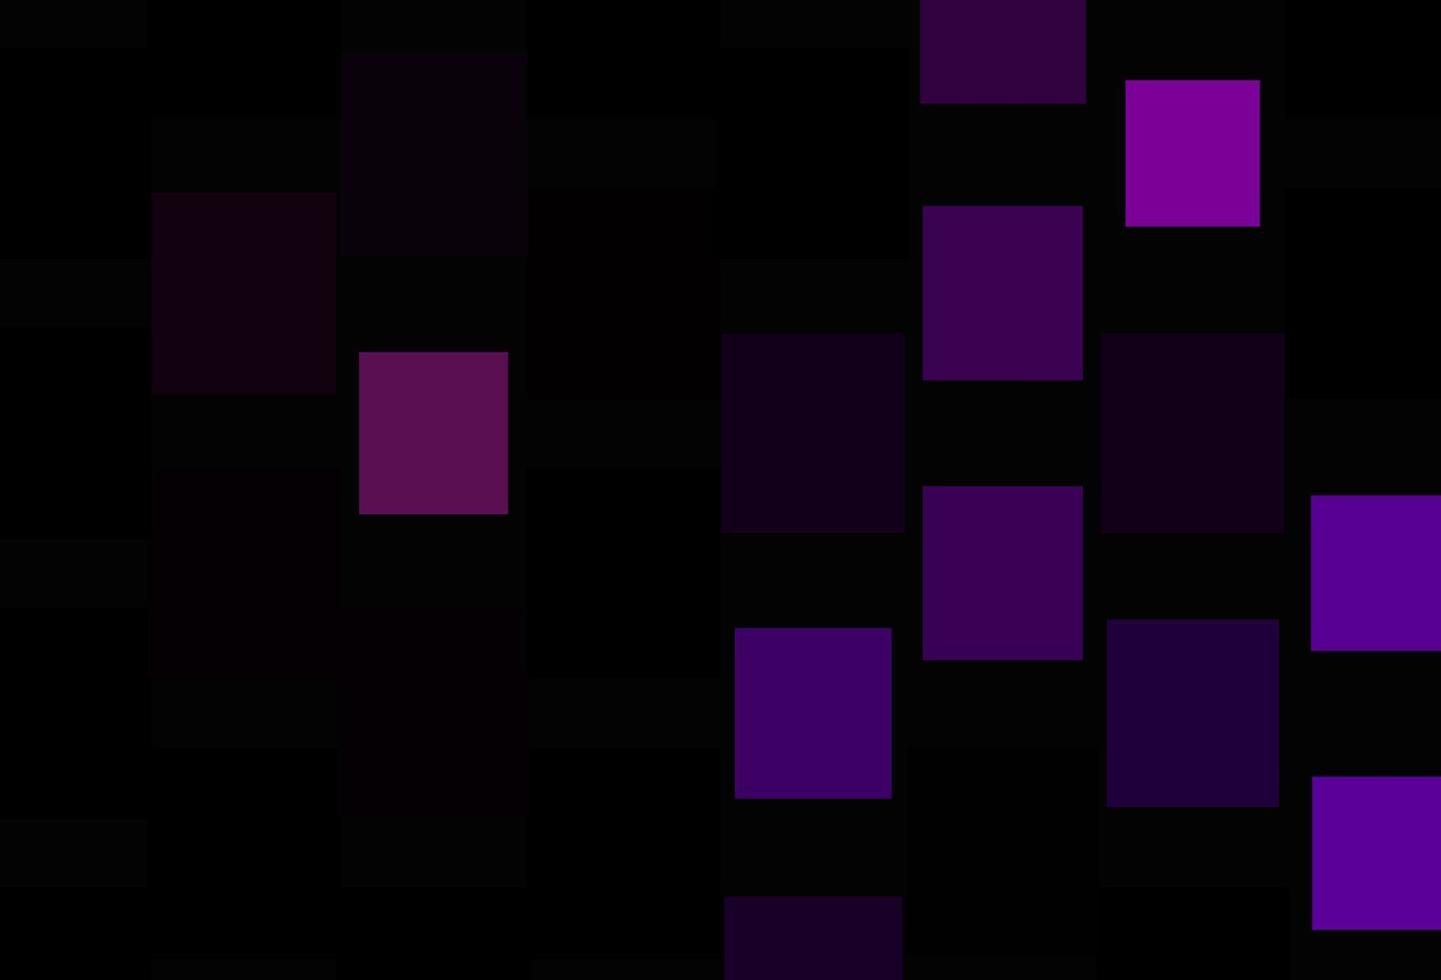 Dark Purple vector layout with rectangles, squares.